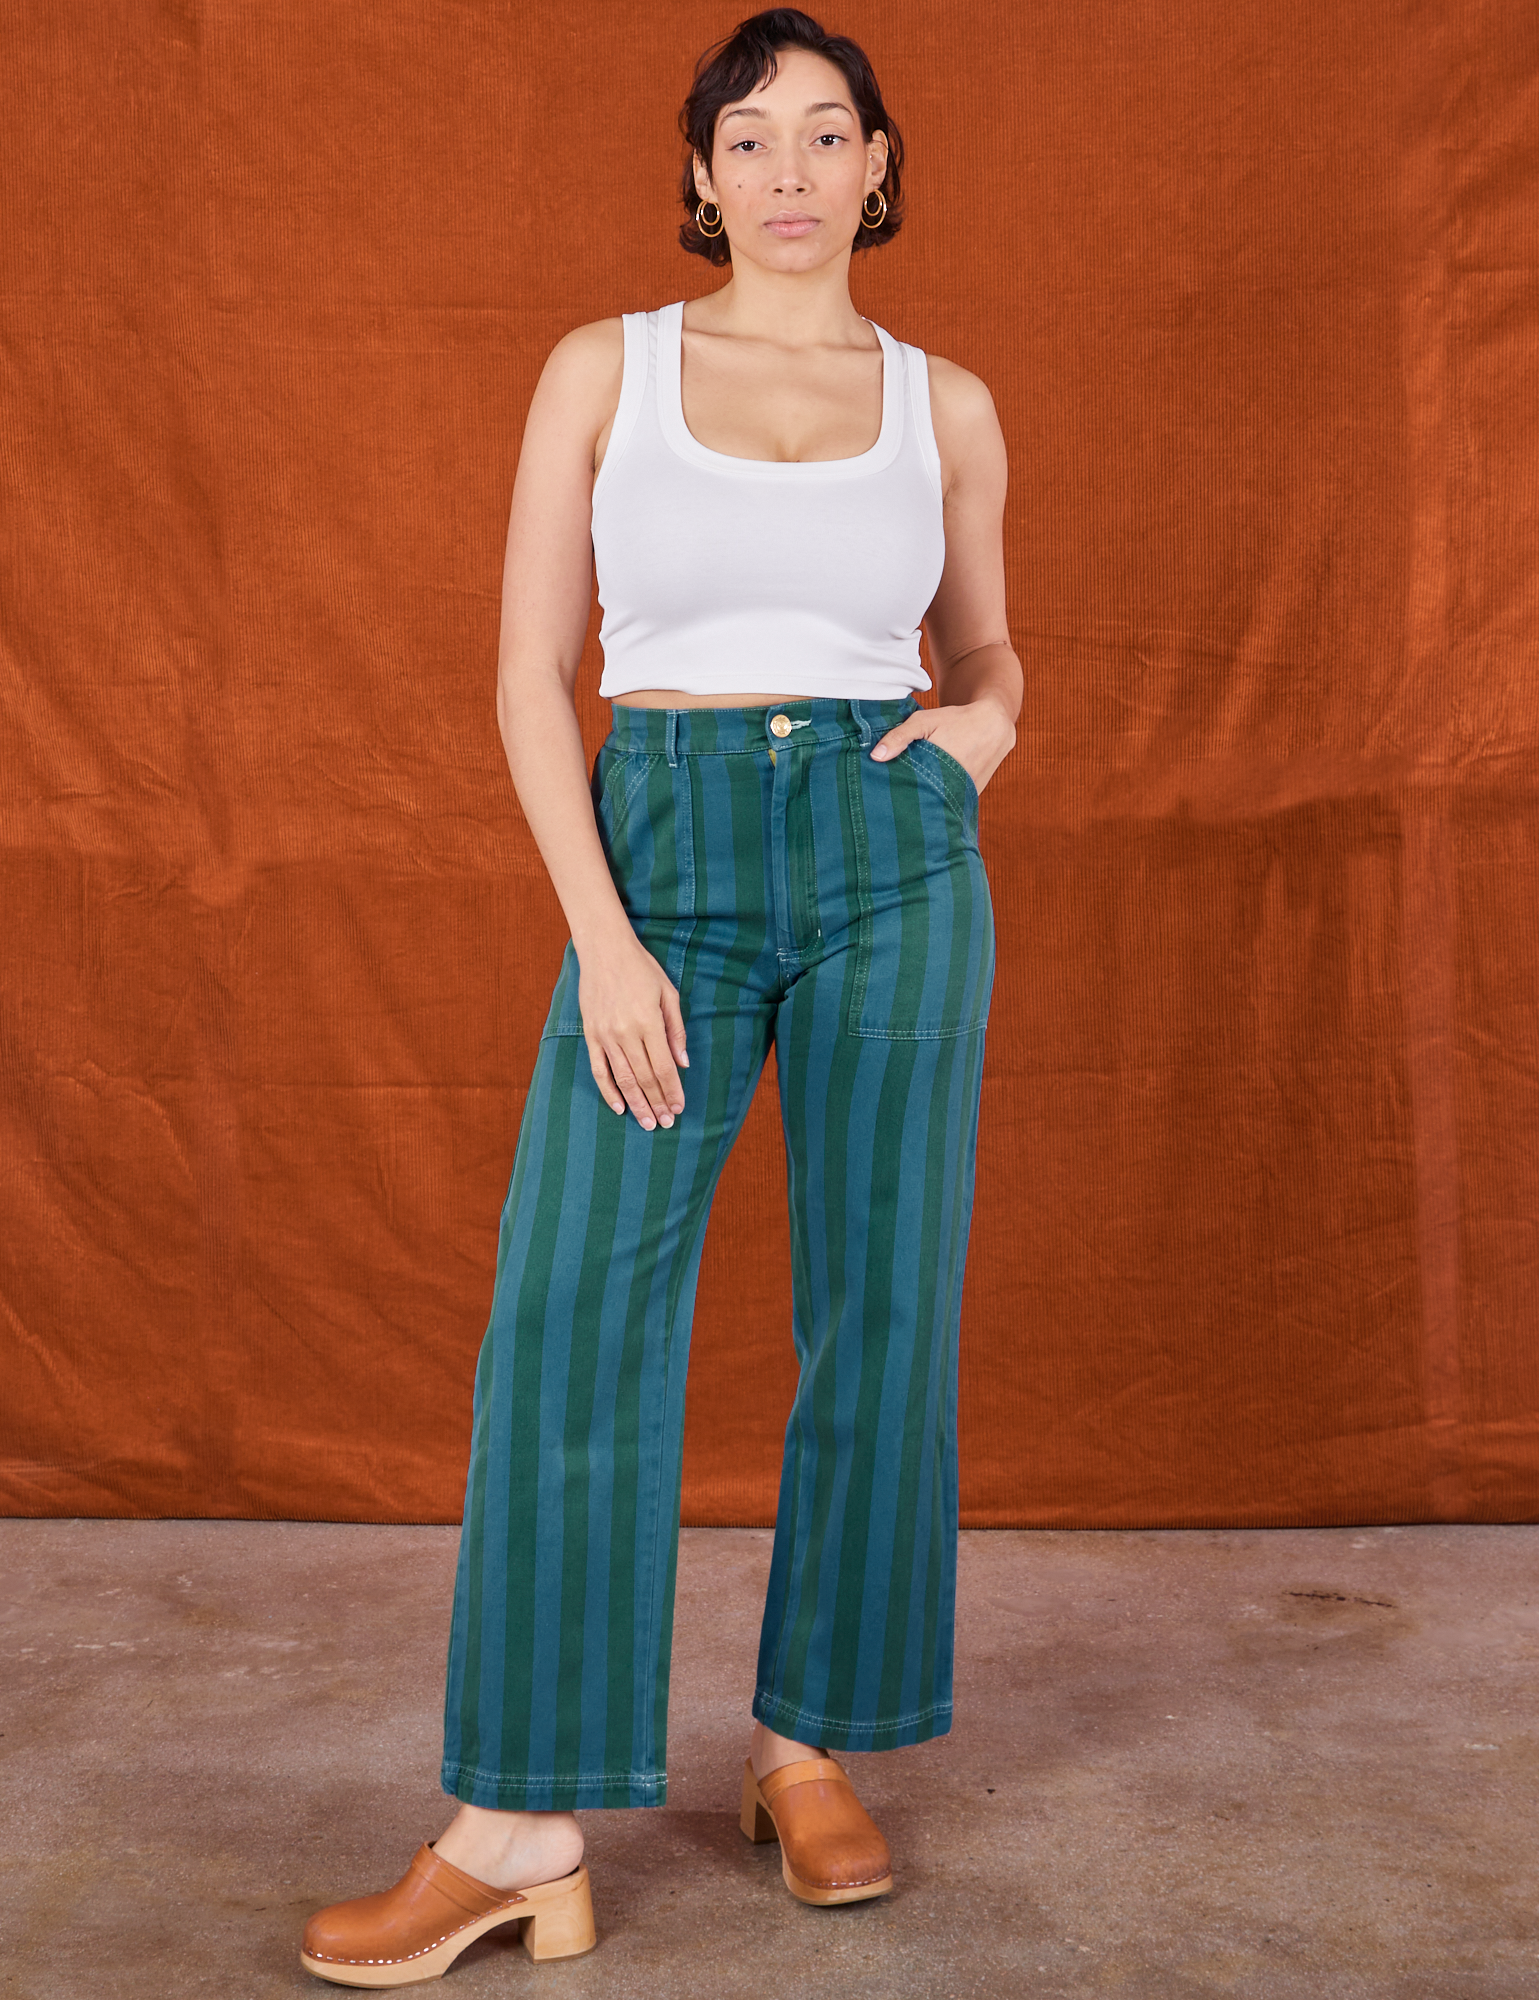 Tiara is 5&#39;4&quot; and wearing size S Overdye Stripe Work Pants in Blue/Green paired with vintage off-white Cropped Tank Top